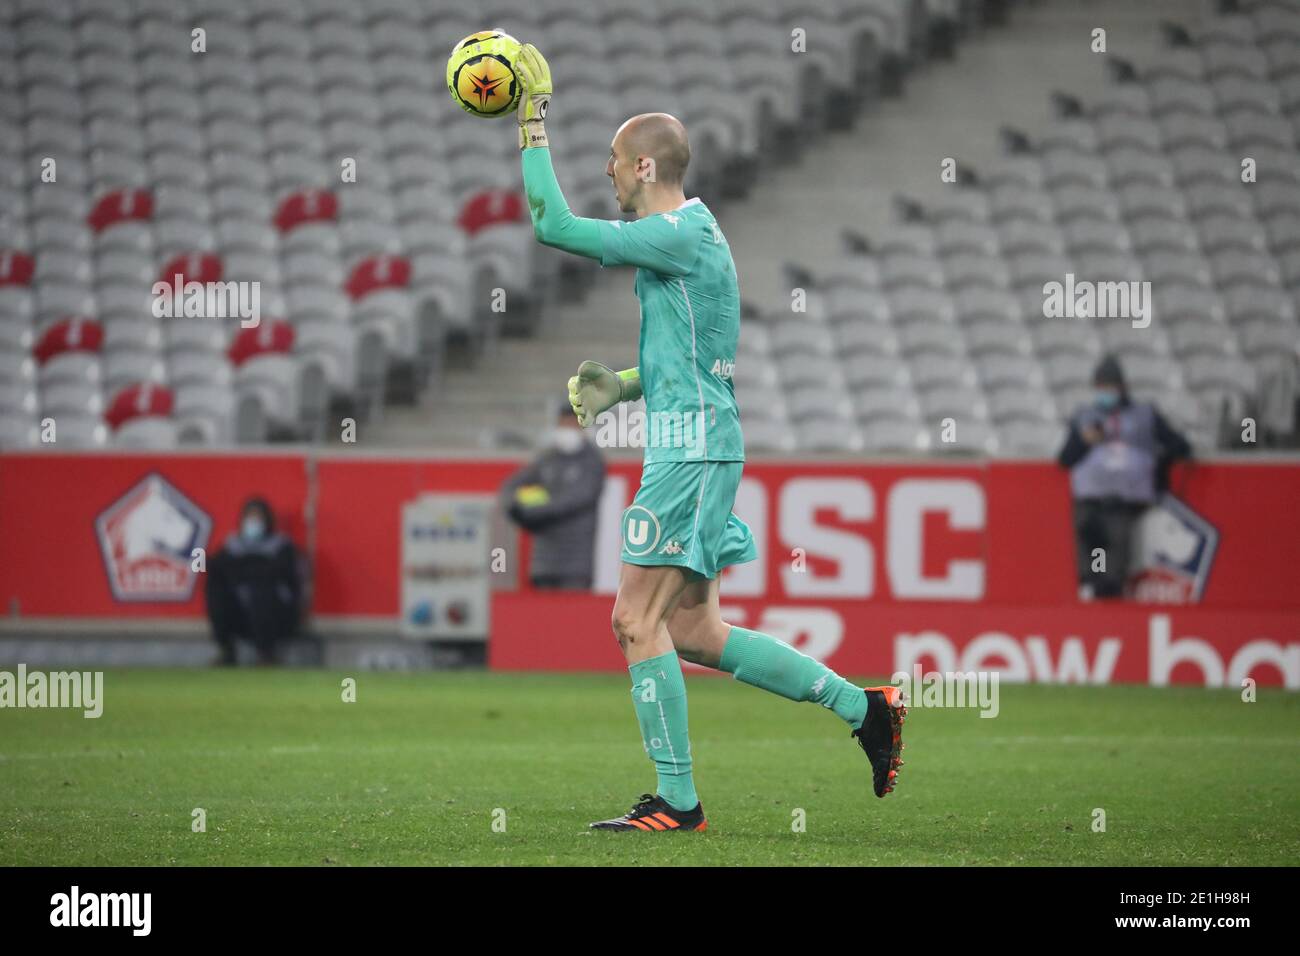 Paul BERNARDONI 1 goalkeeper Angers during the French championship Ligue 1 football match between Lille OSC and Angers SCO on  / LM Stock Photo